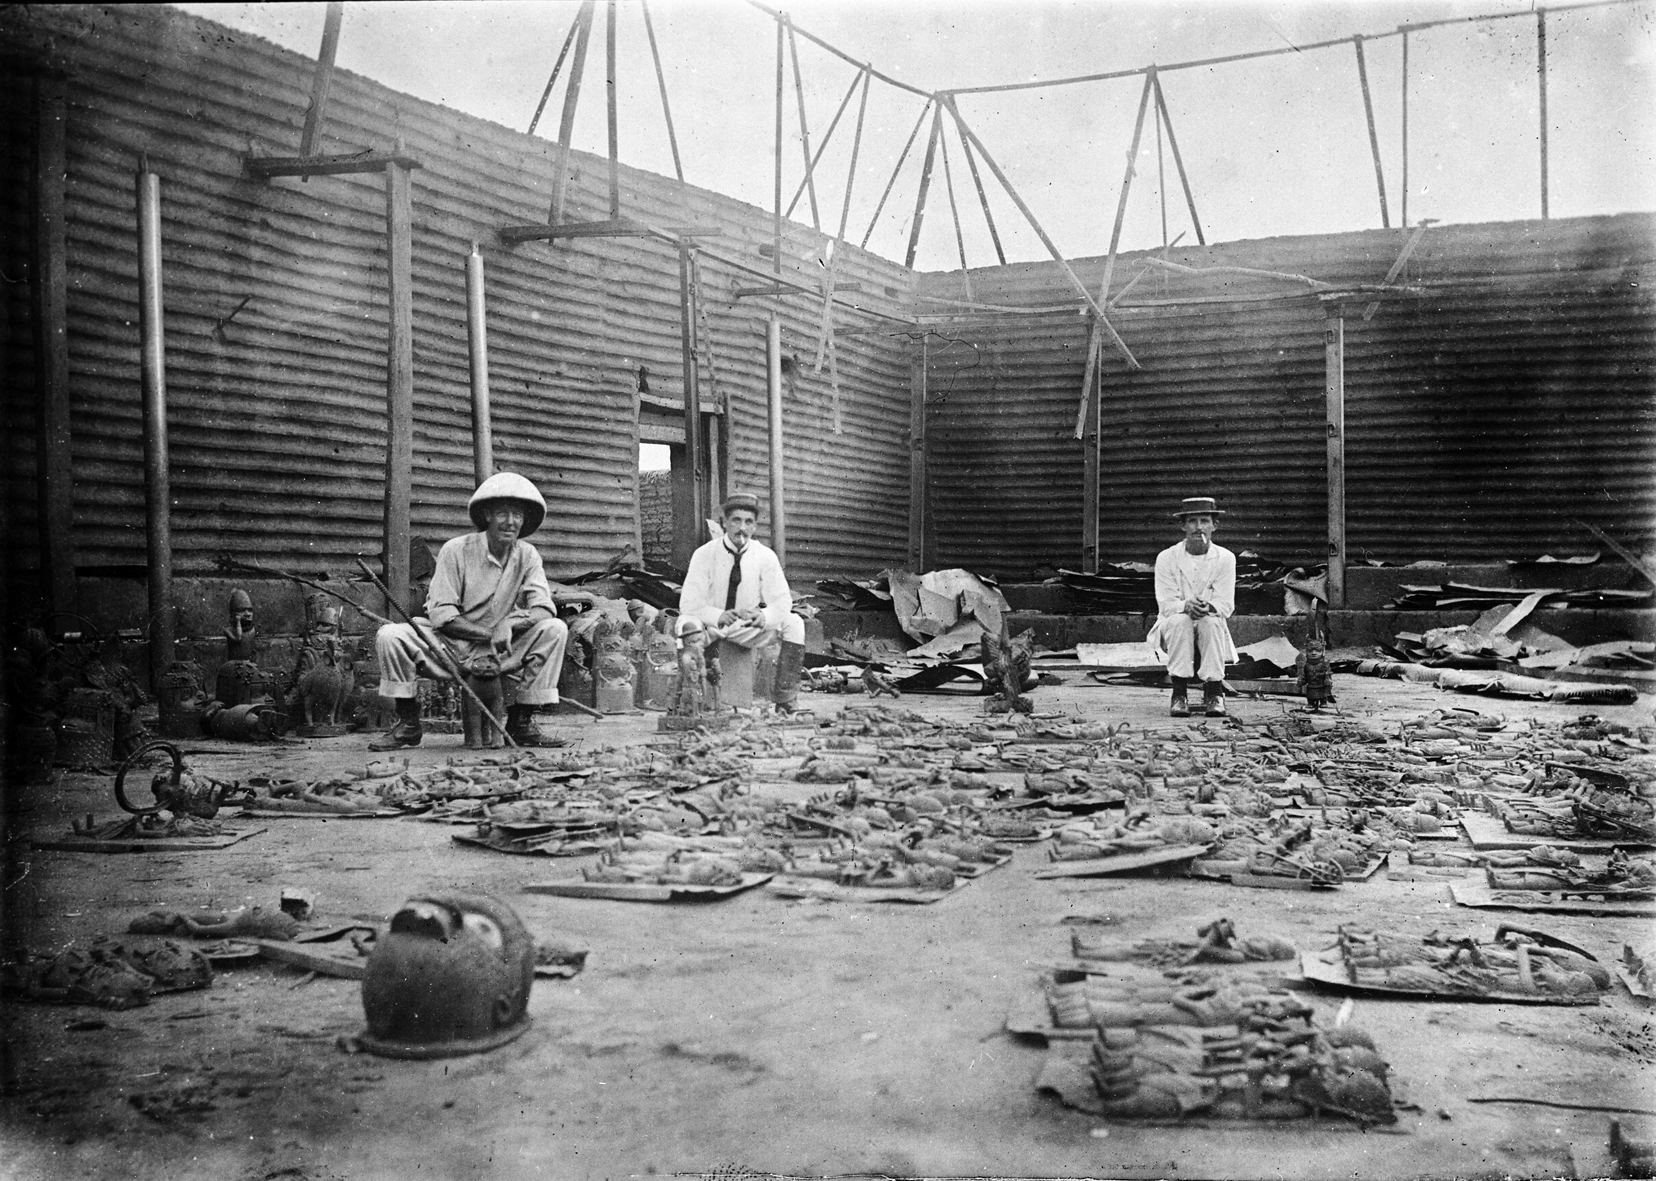 A photograph of the interior of Oba's palace during the punitive expedition, with the looted Benin Bronzes in the foreground, 1897.